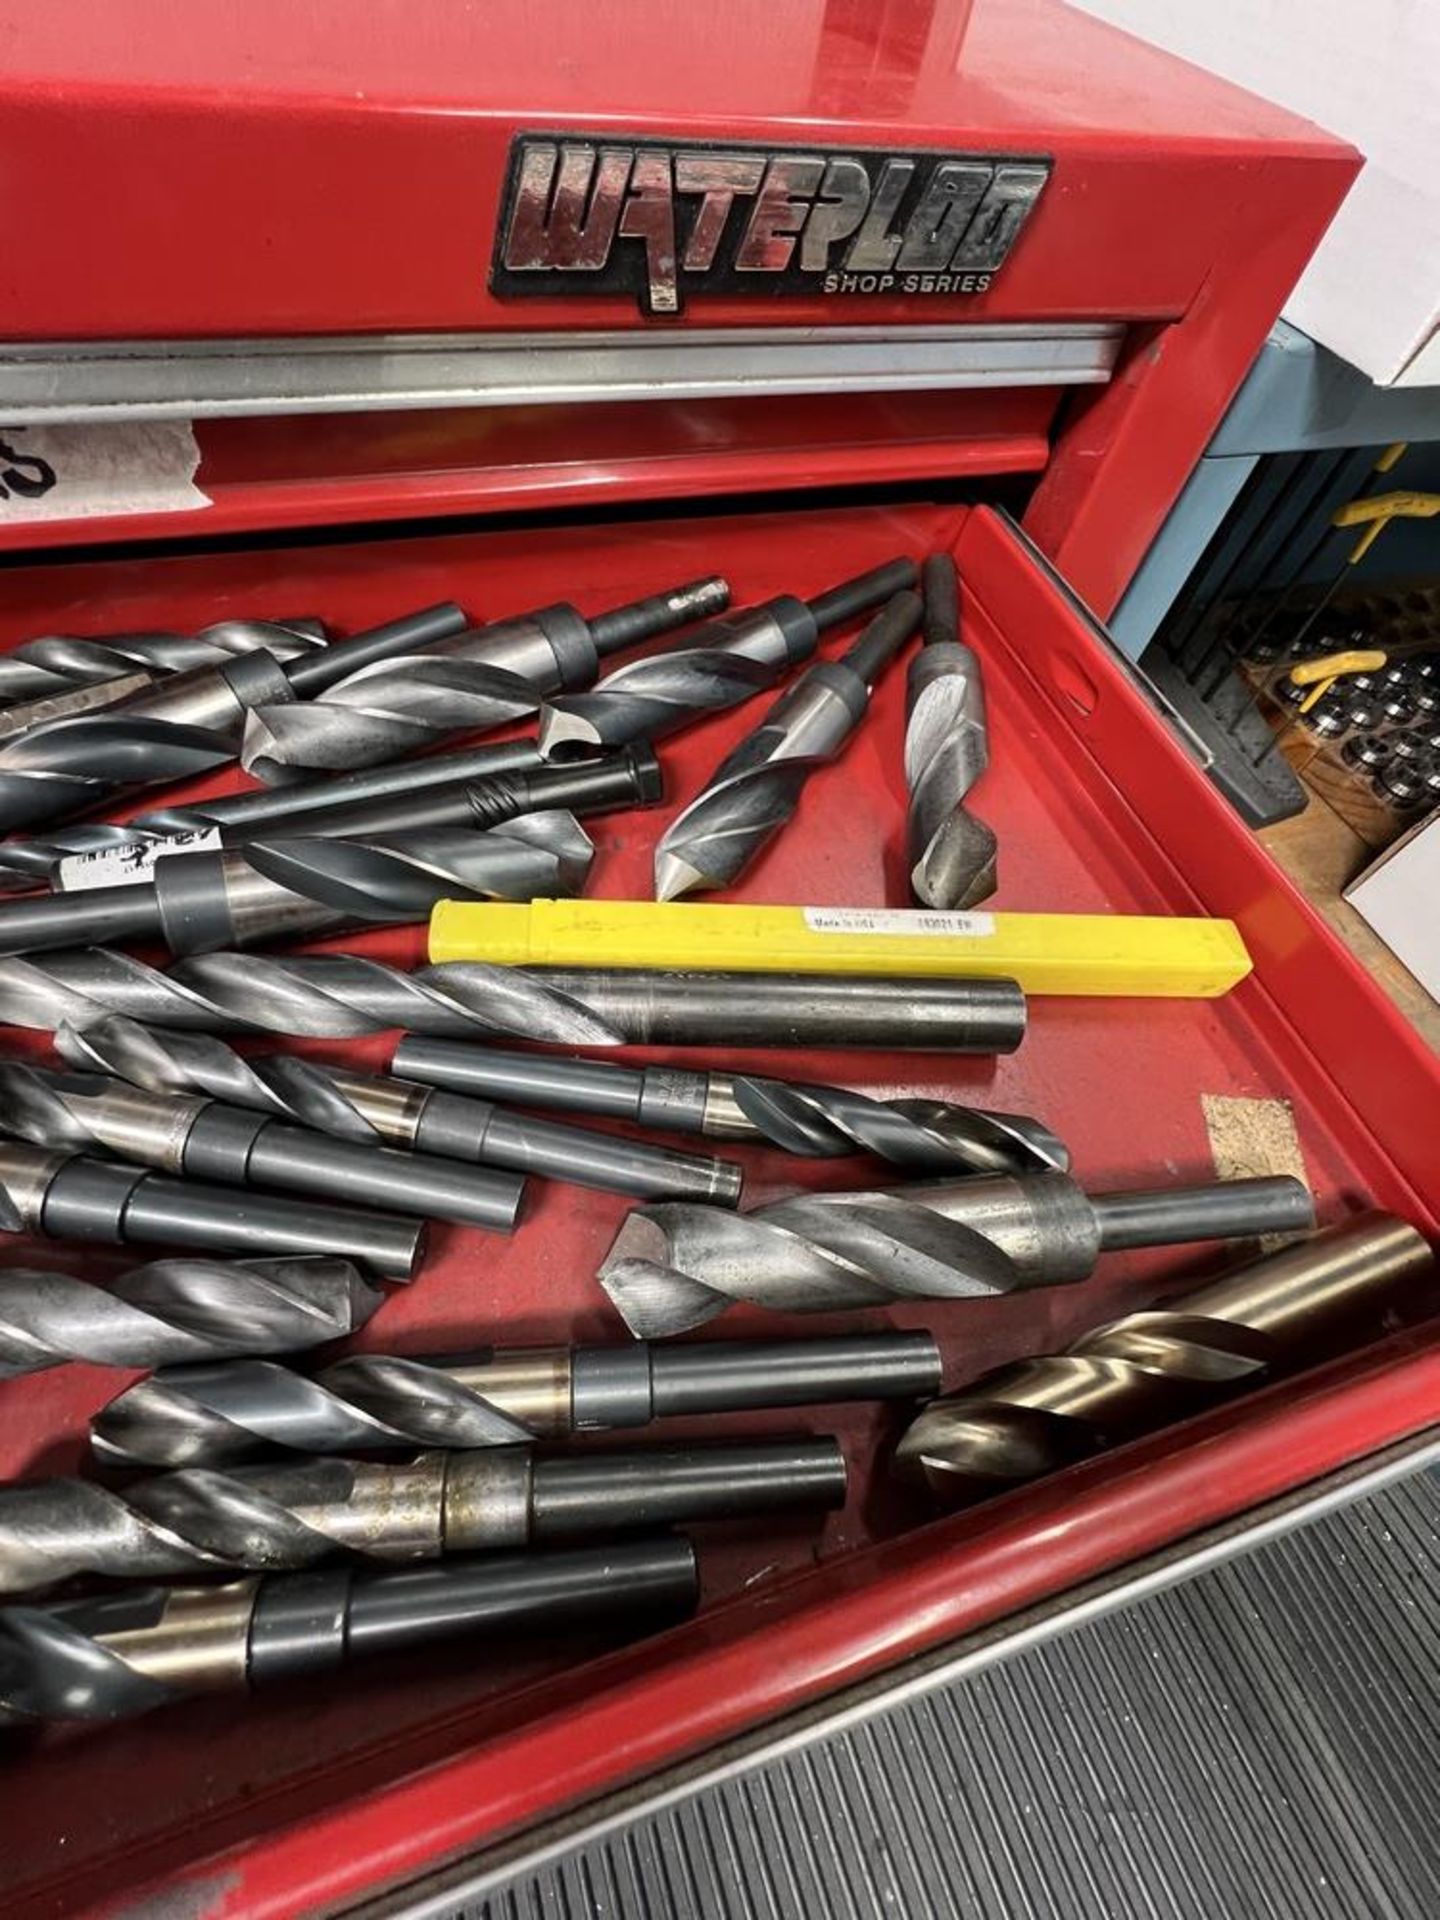 Water 100 Shop Series Tool Box Full of Reamers Big Drills & Key Cutters & Others - Image 9 of 9